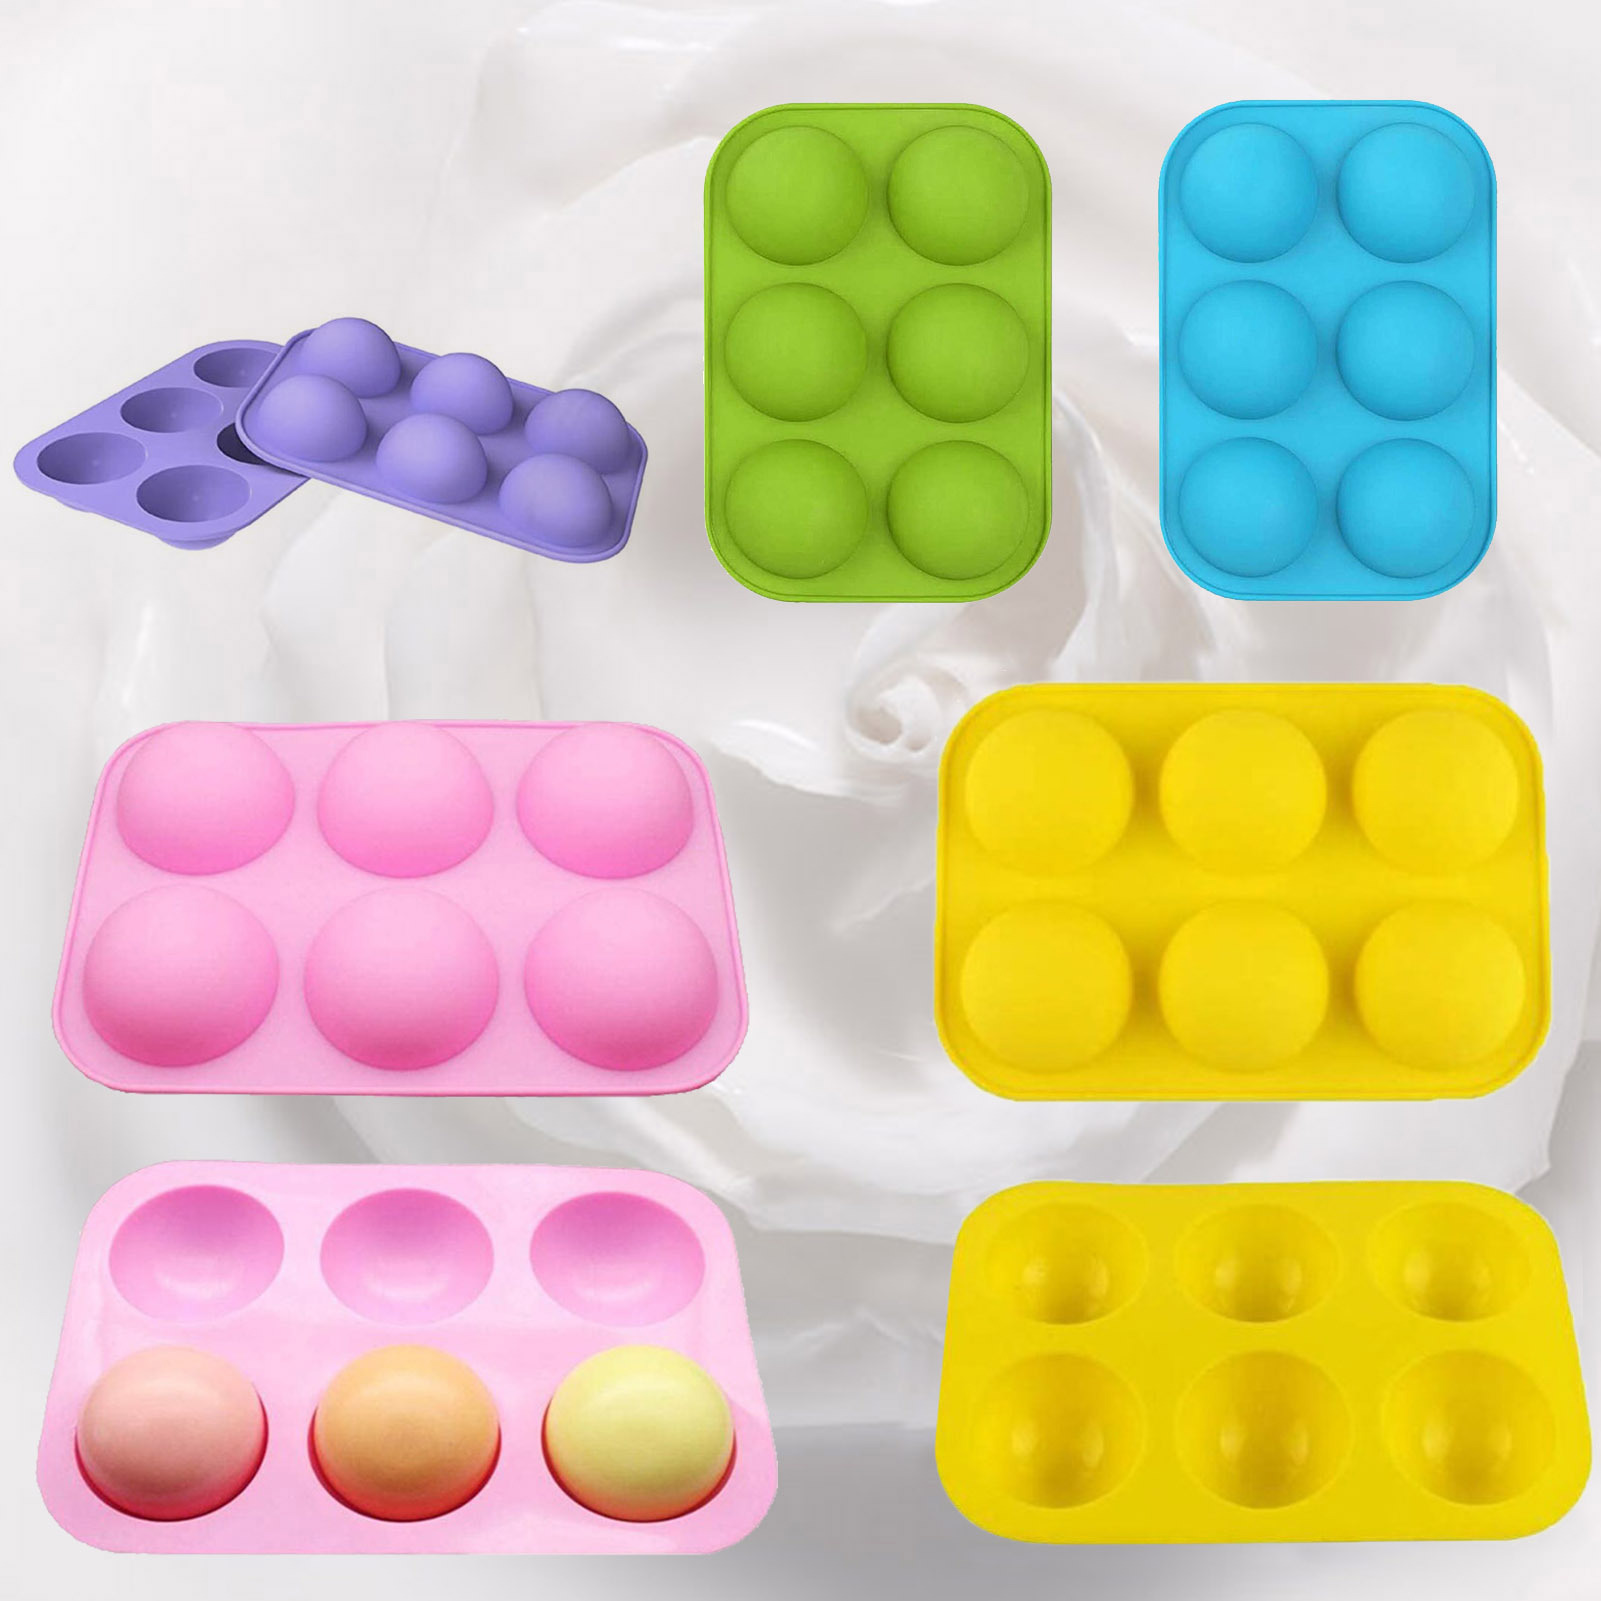 

Chocolate Molds Silicone for Baking Semi Sphere Silicone Molds Baking Mold for Making Kitchen Hot Chocolate Bomb Cake Jelly Dome Mousse